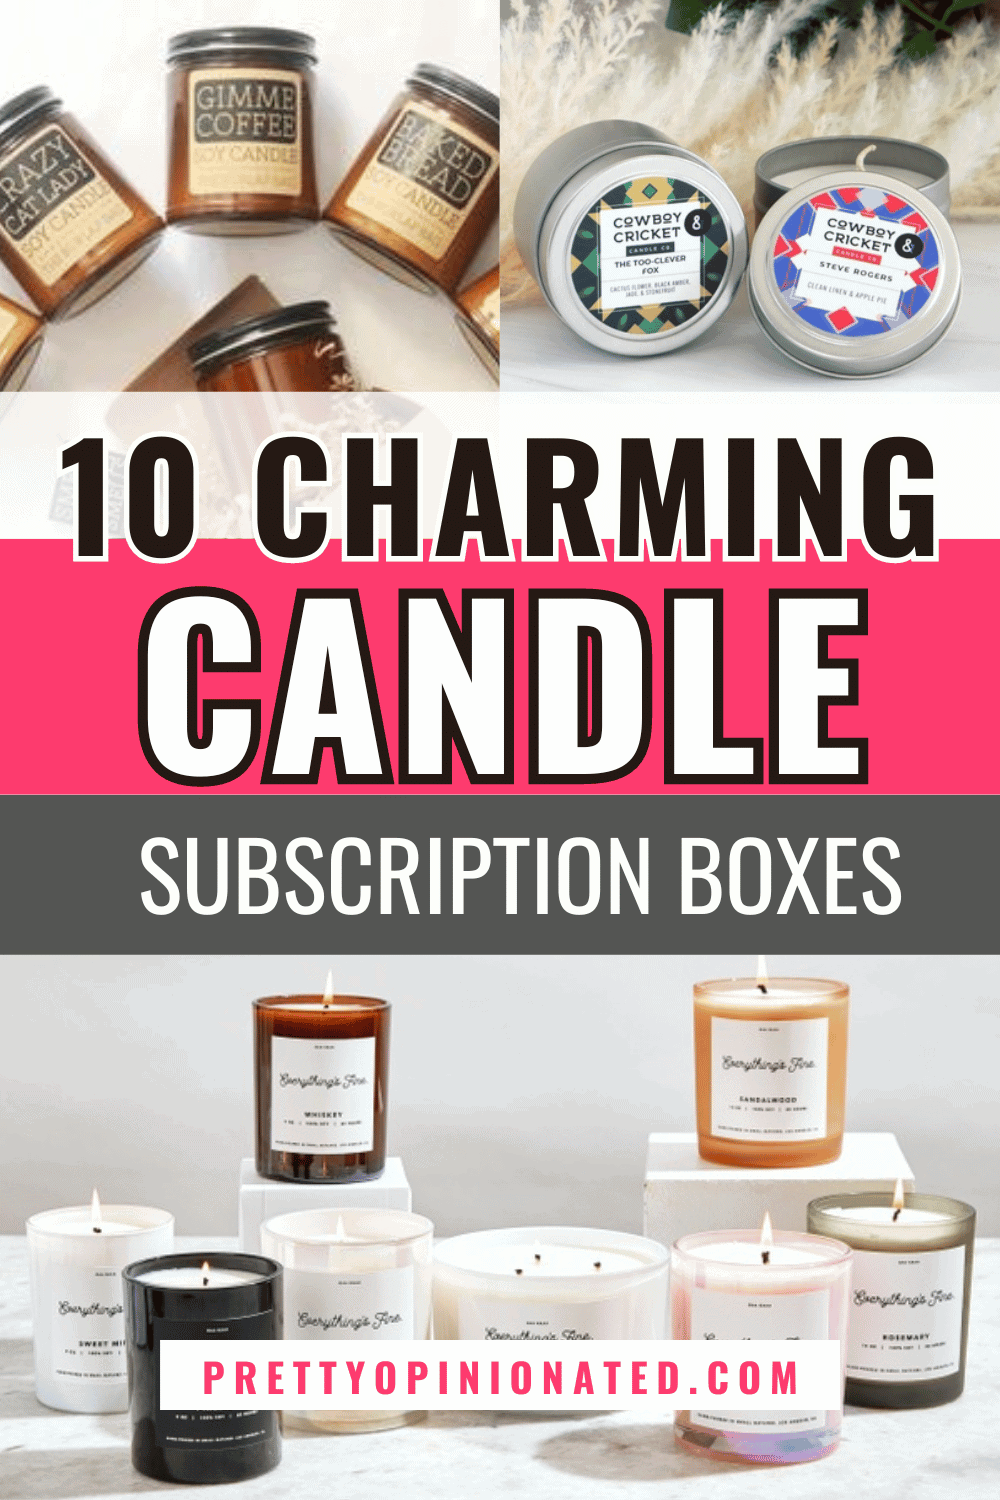 Looking for the best candle subscription boxes? These curated picks make amazing housewarming gifts (pun intended), spell work supplies, and more! Check them out!